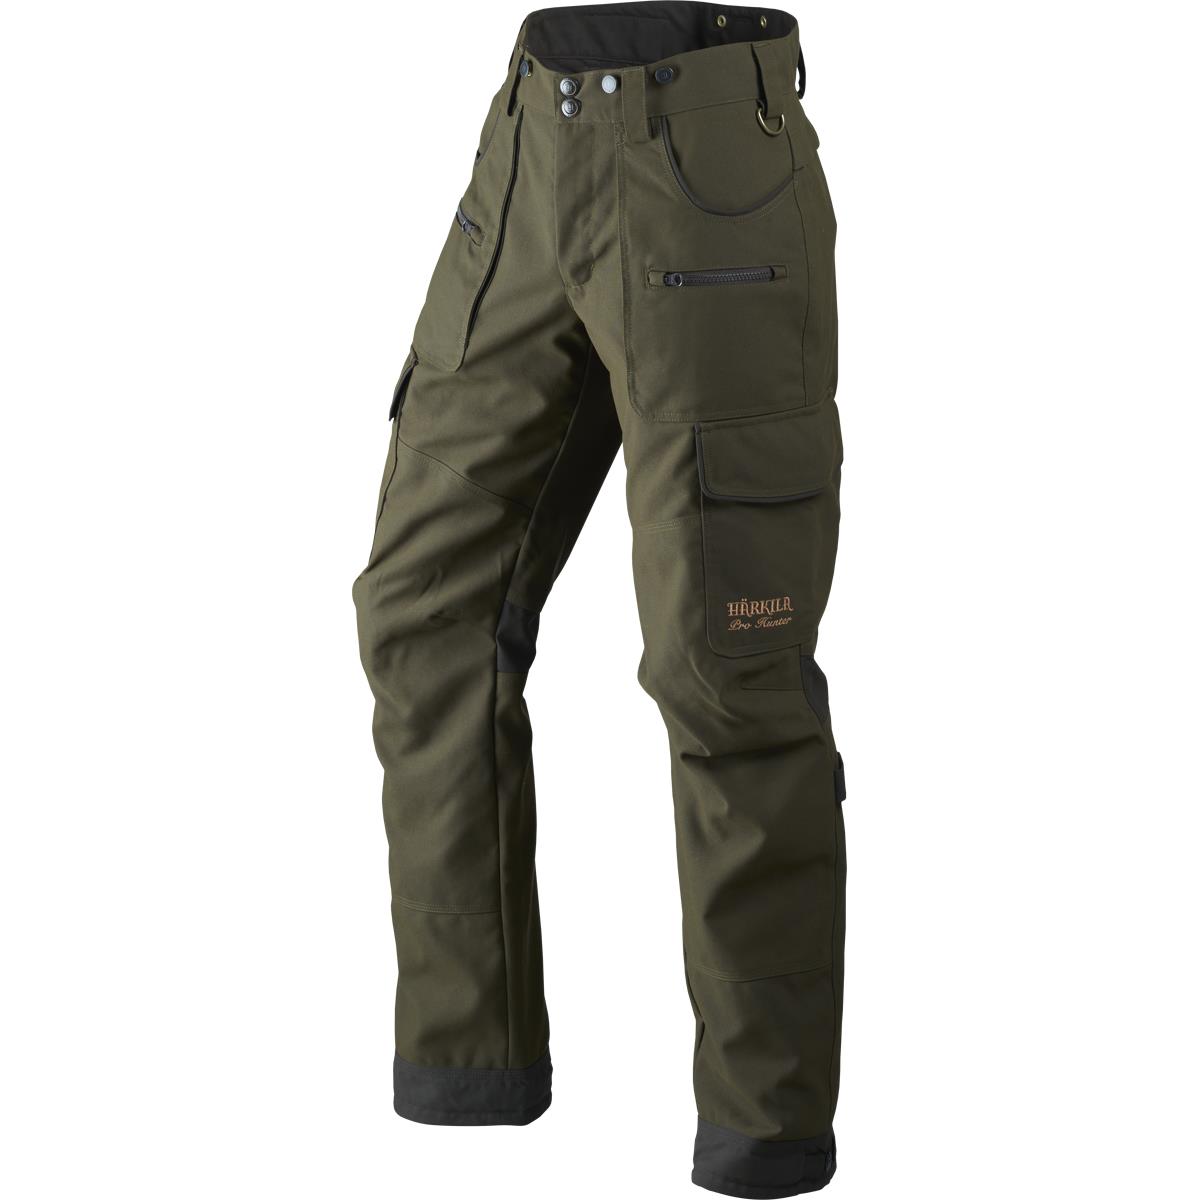 What is the reference number for the Harkila Pro Hunter trousers?